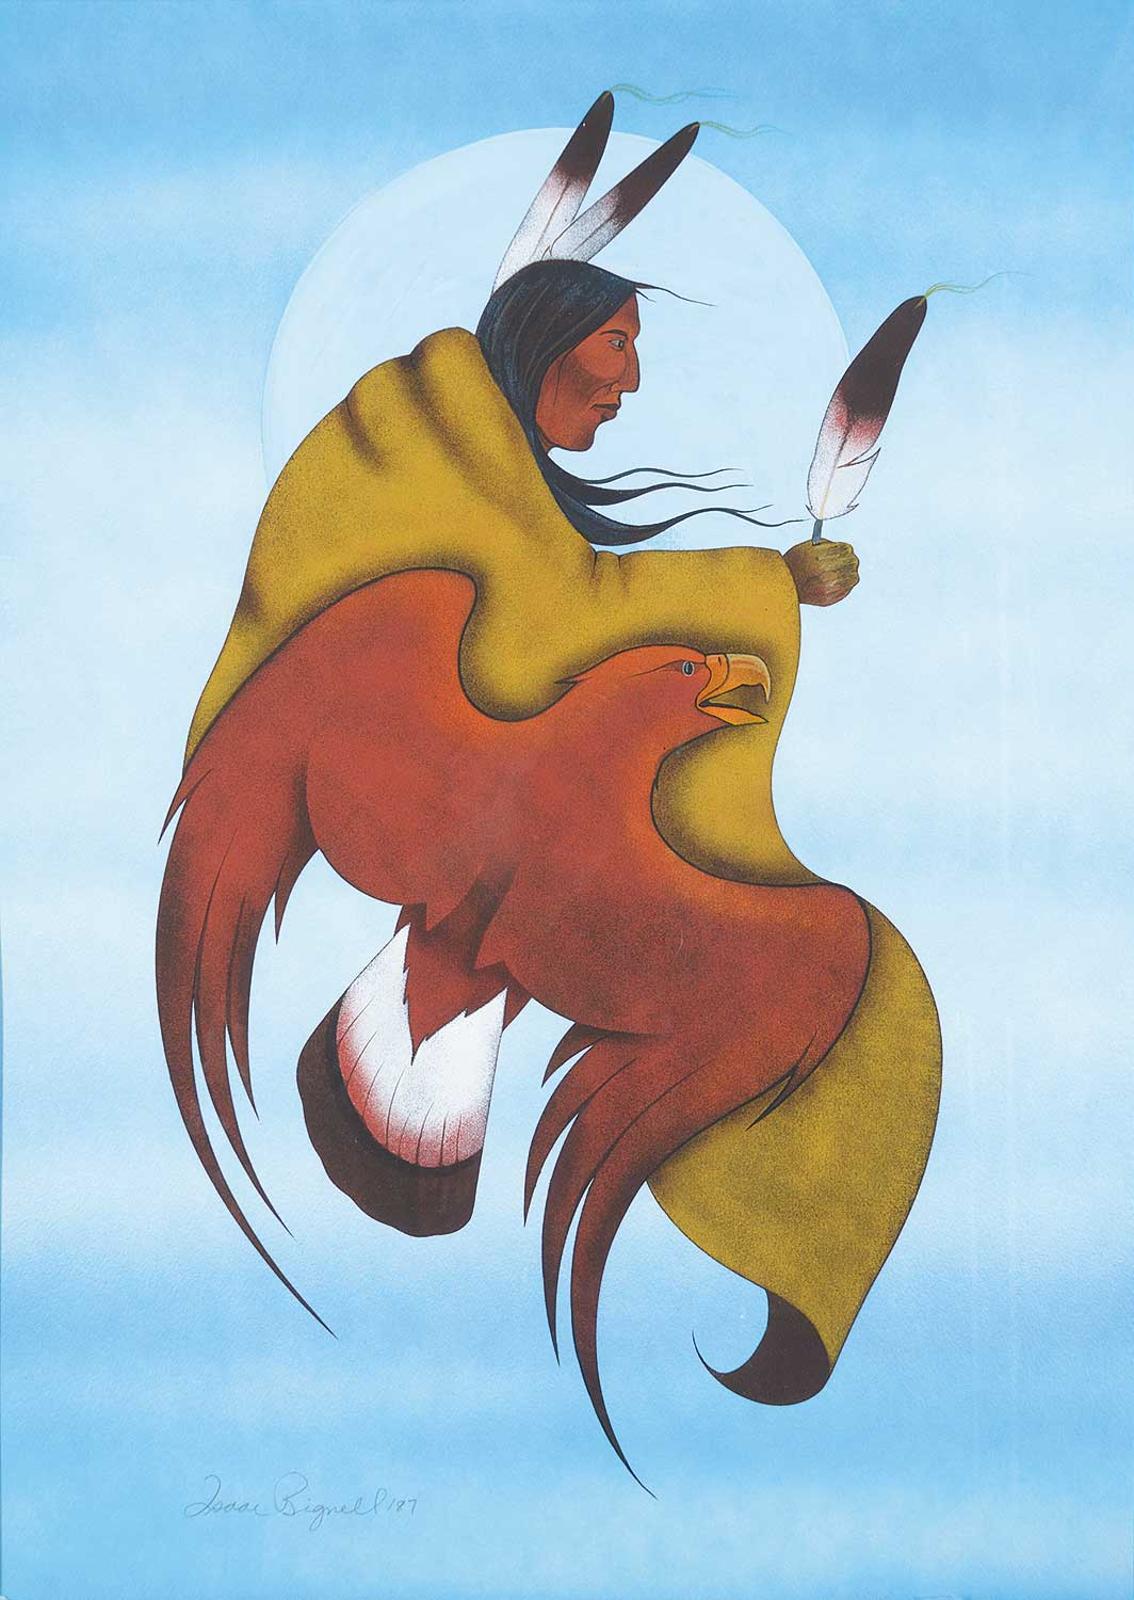 Isaac Bignell (1960-1995) - Untitled - Chief and Eagle